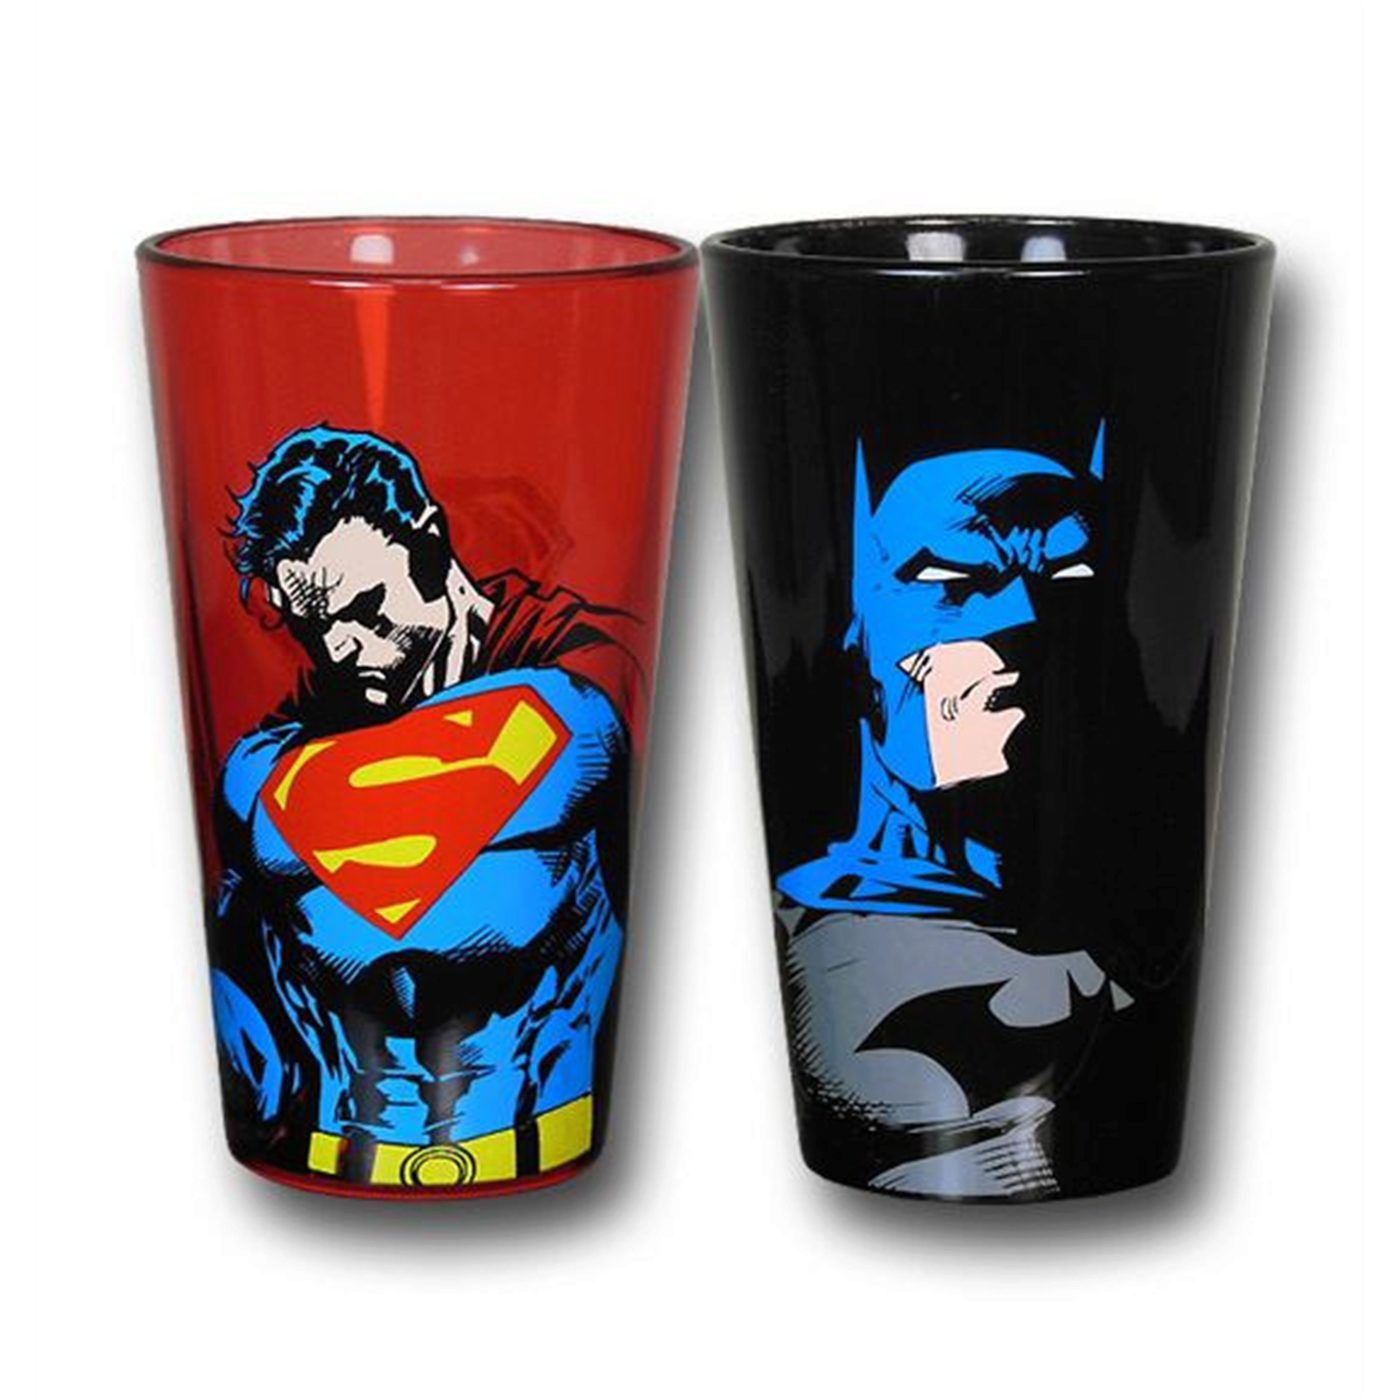 Superman and Batman Red and Black Pint Glass Set